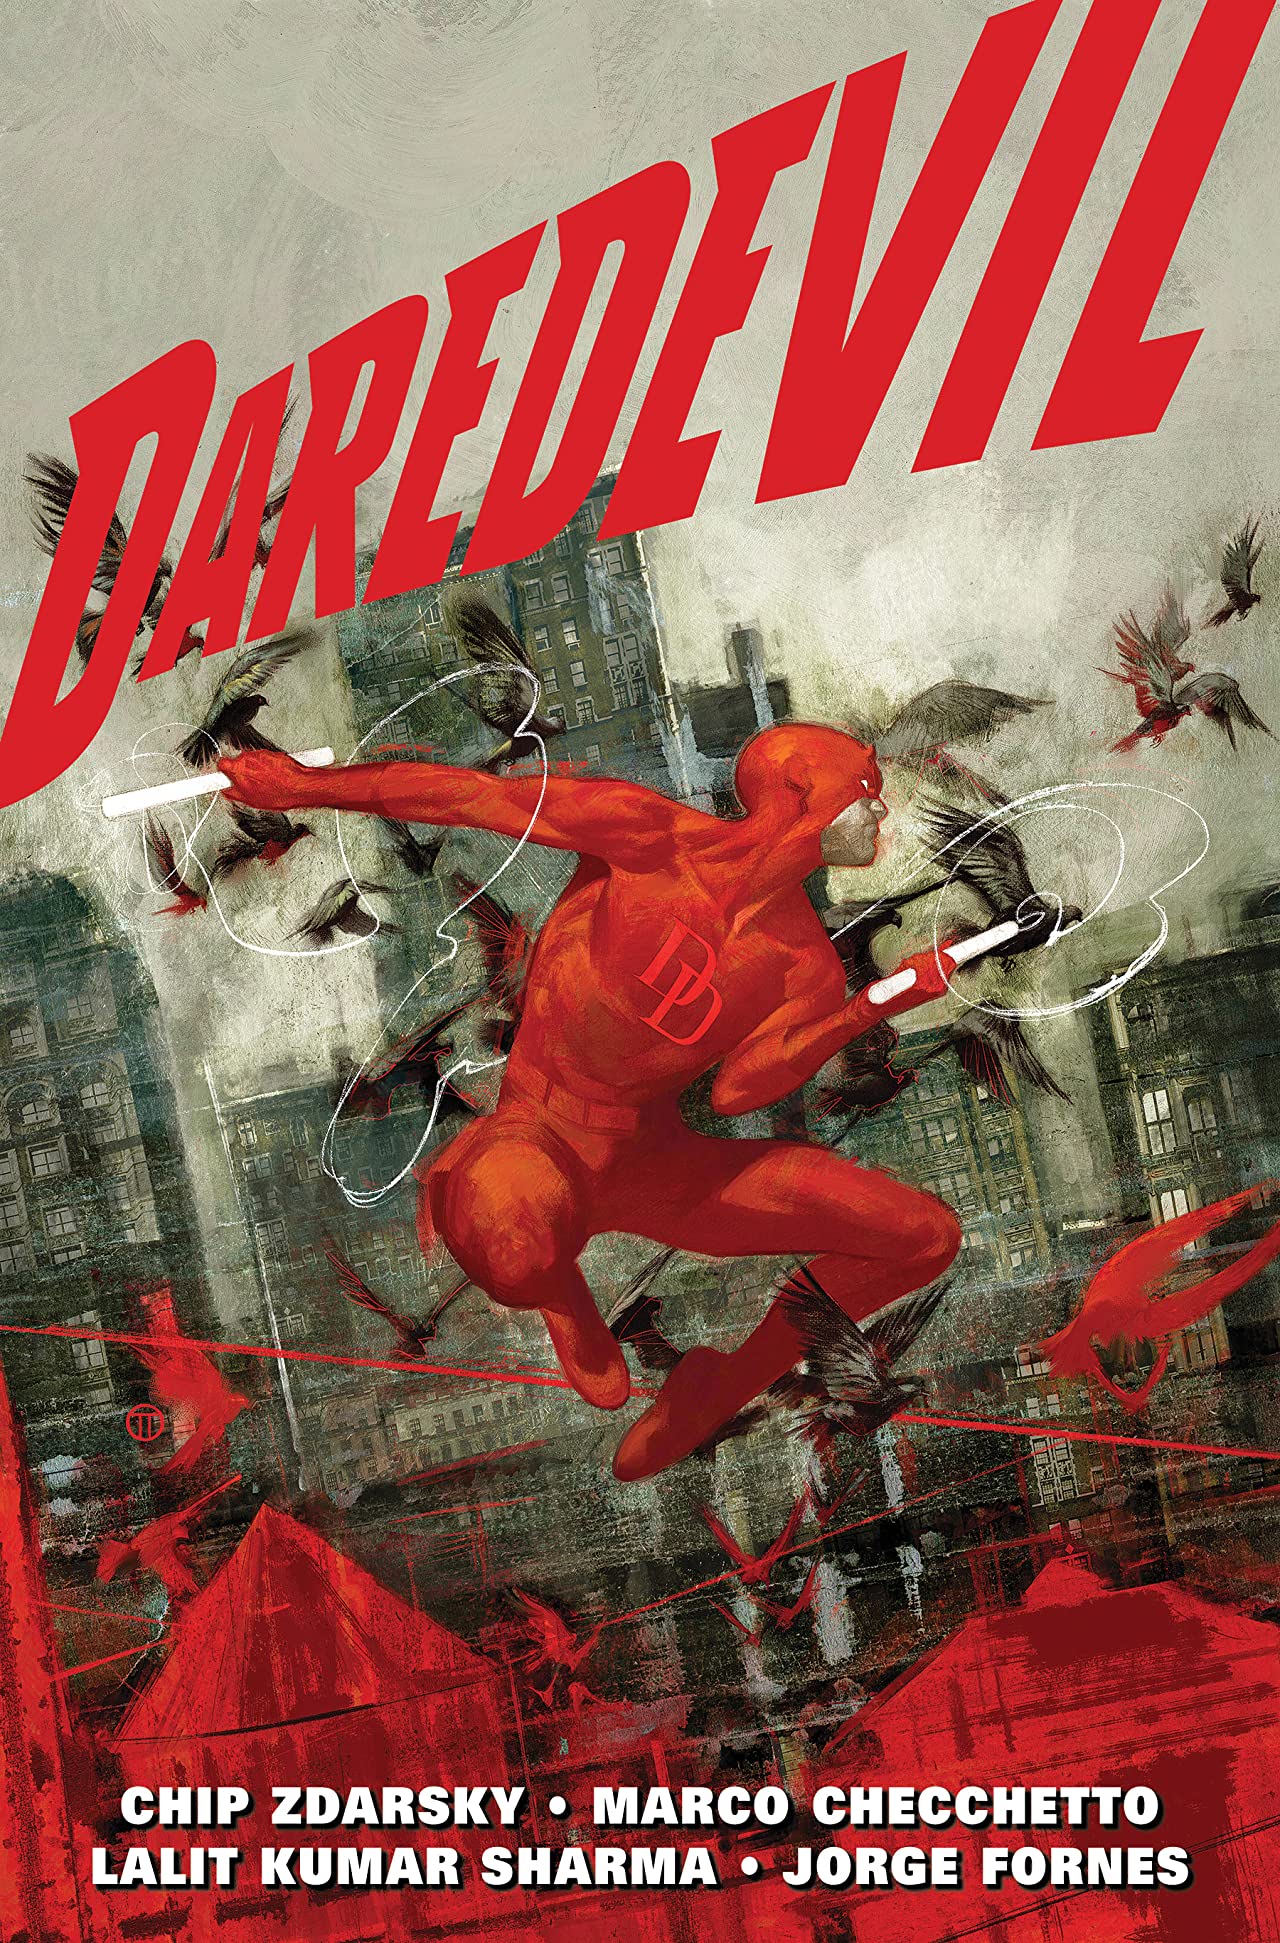 Daredevil by Chip Zdarsky: To Heaven Through Hell Vol. 1 (Hardcover)